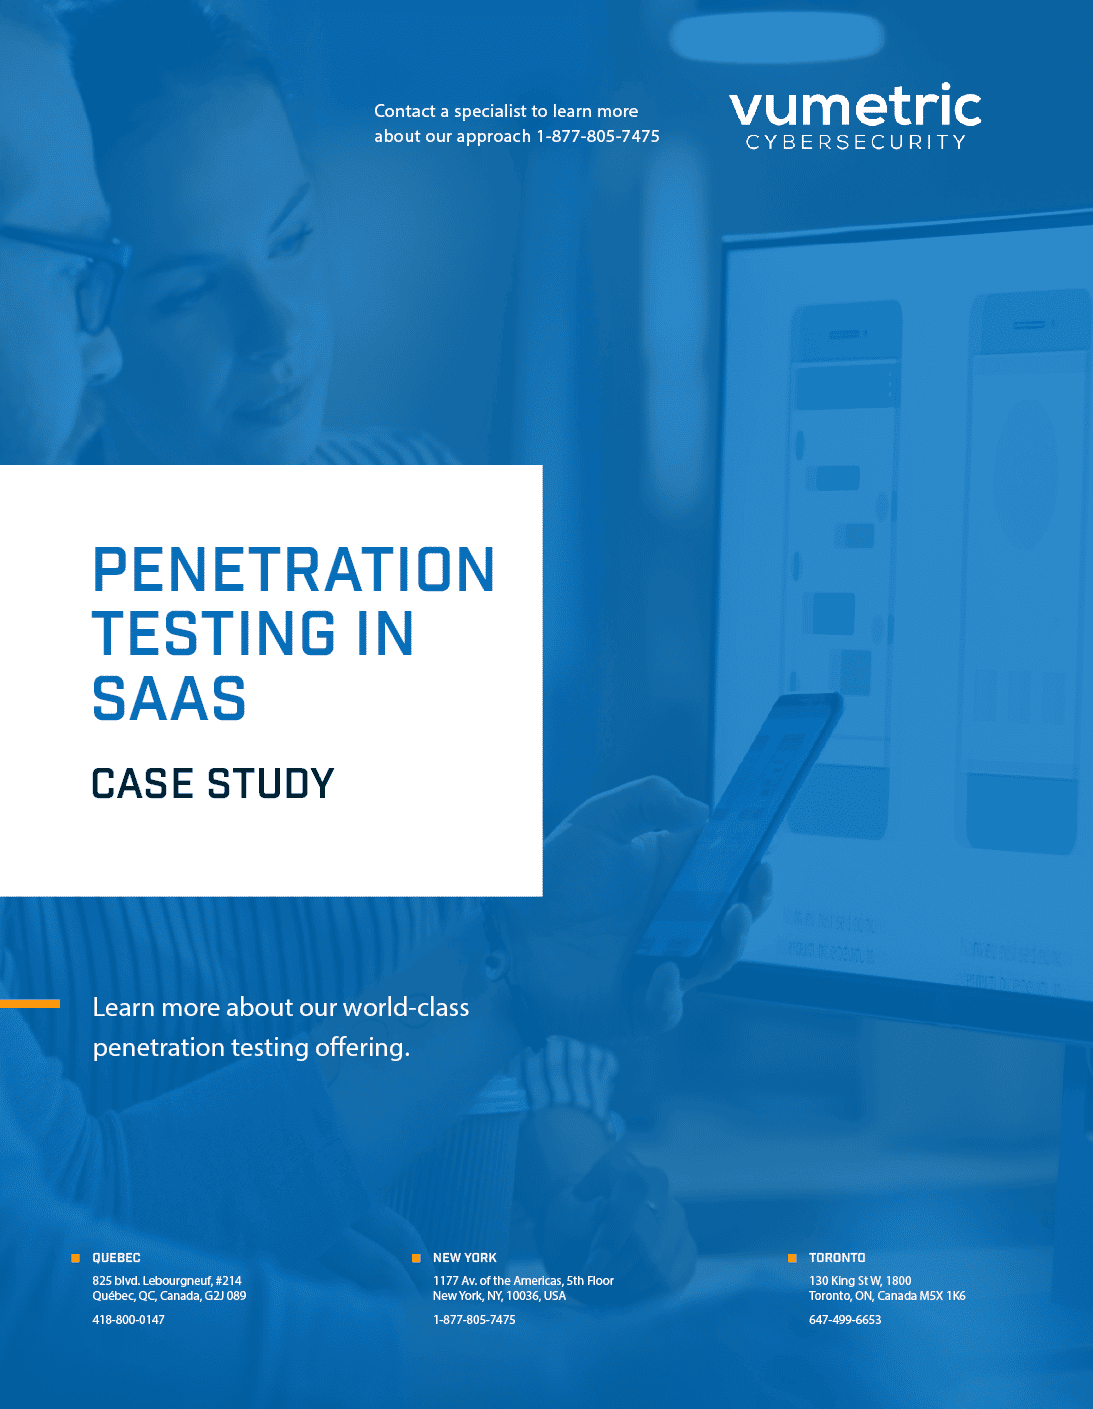 Penetration Testing Case Study in SaaS